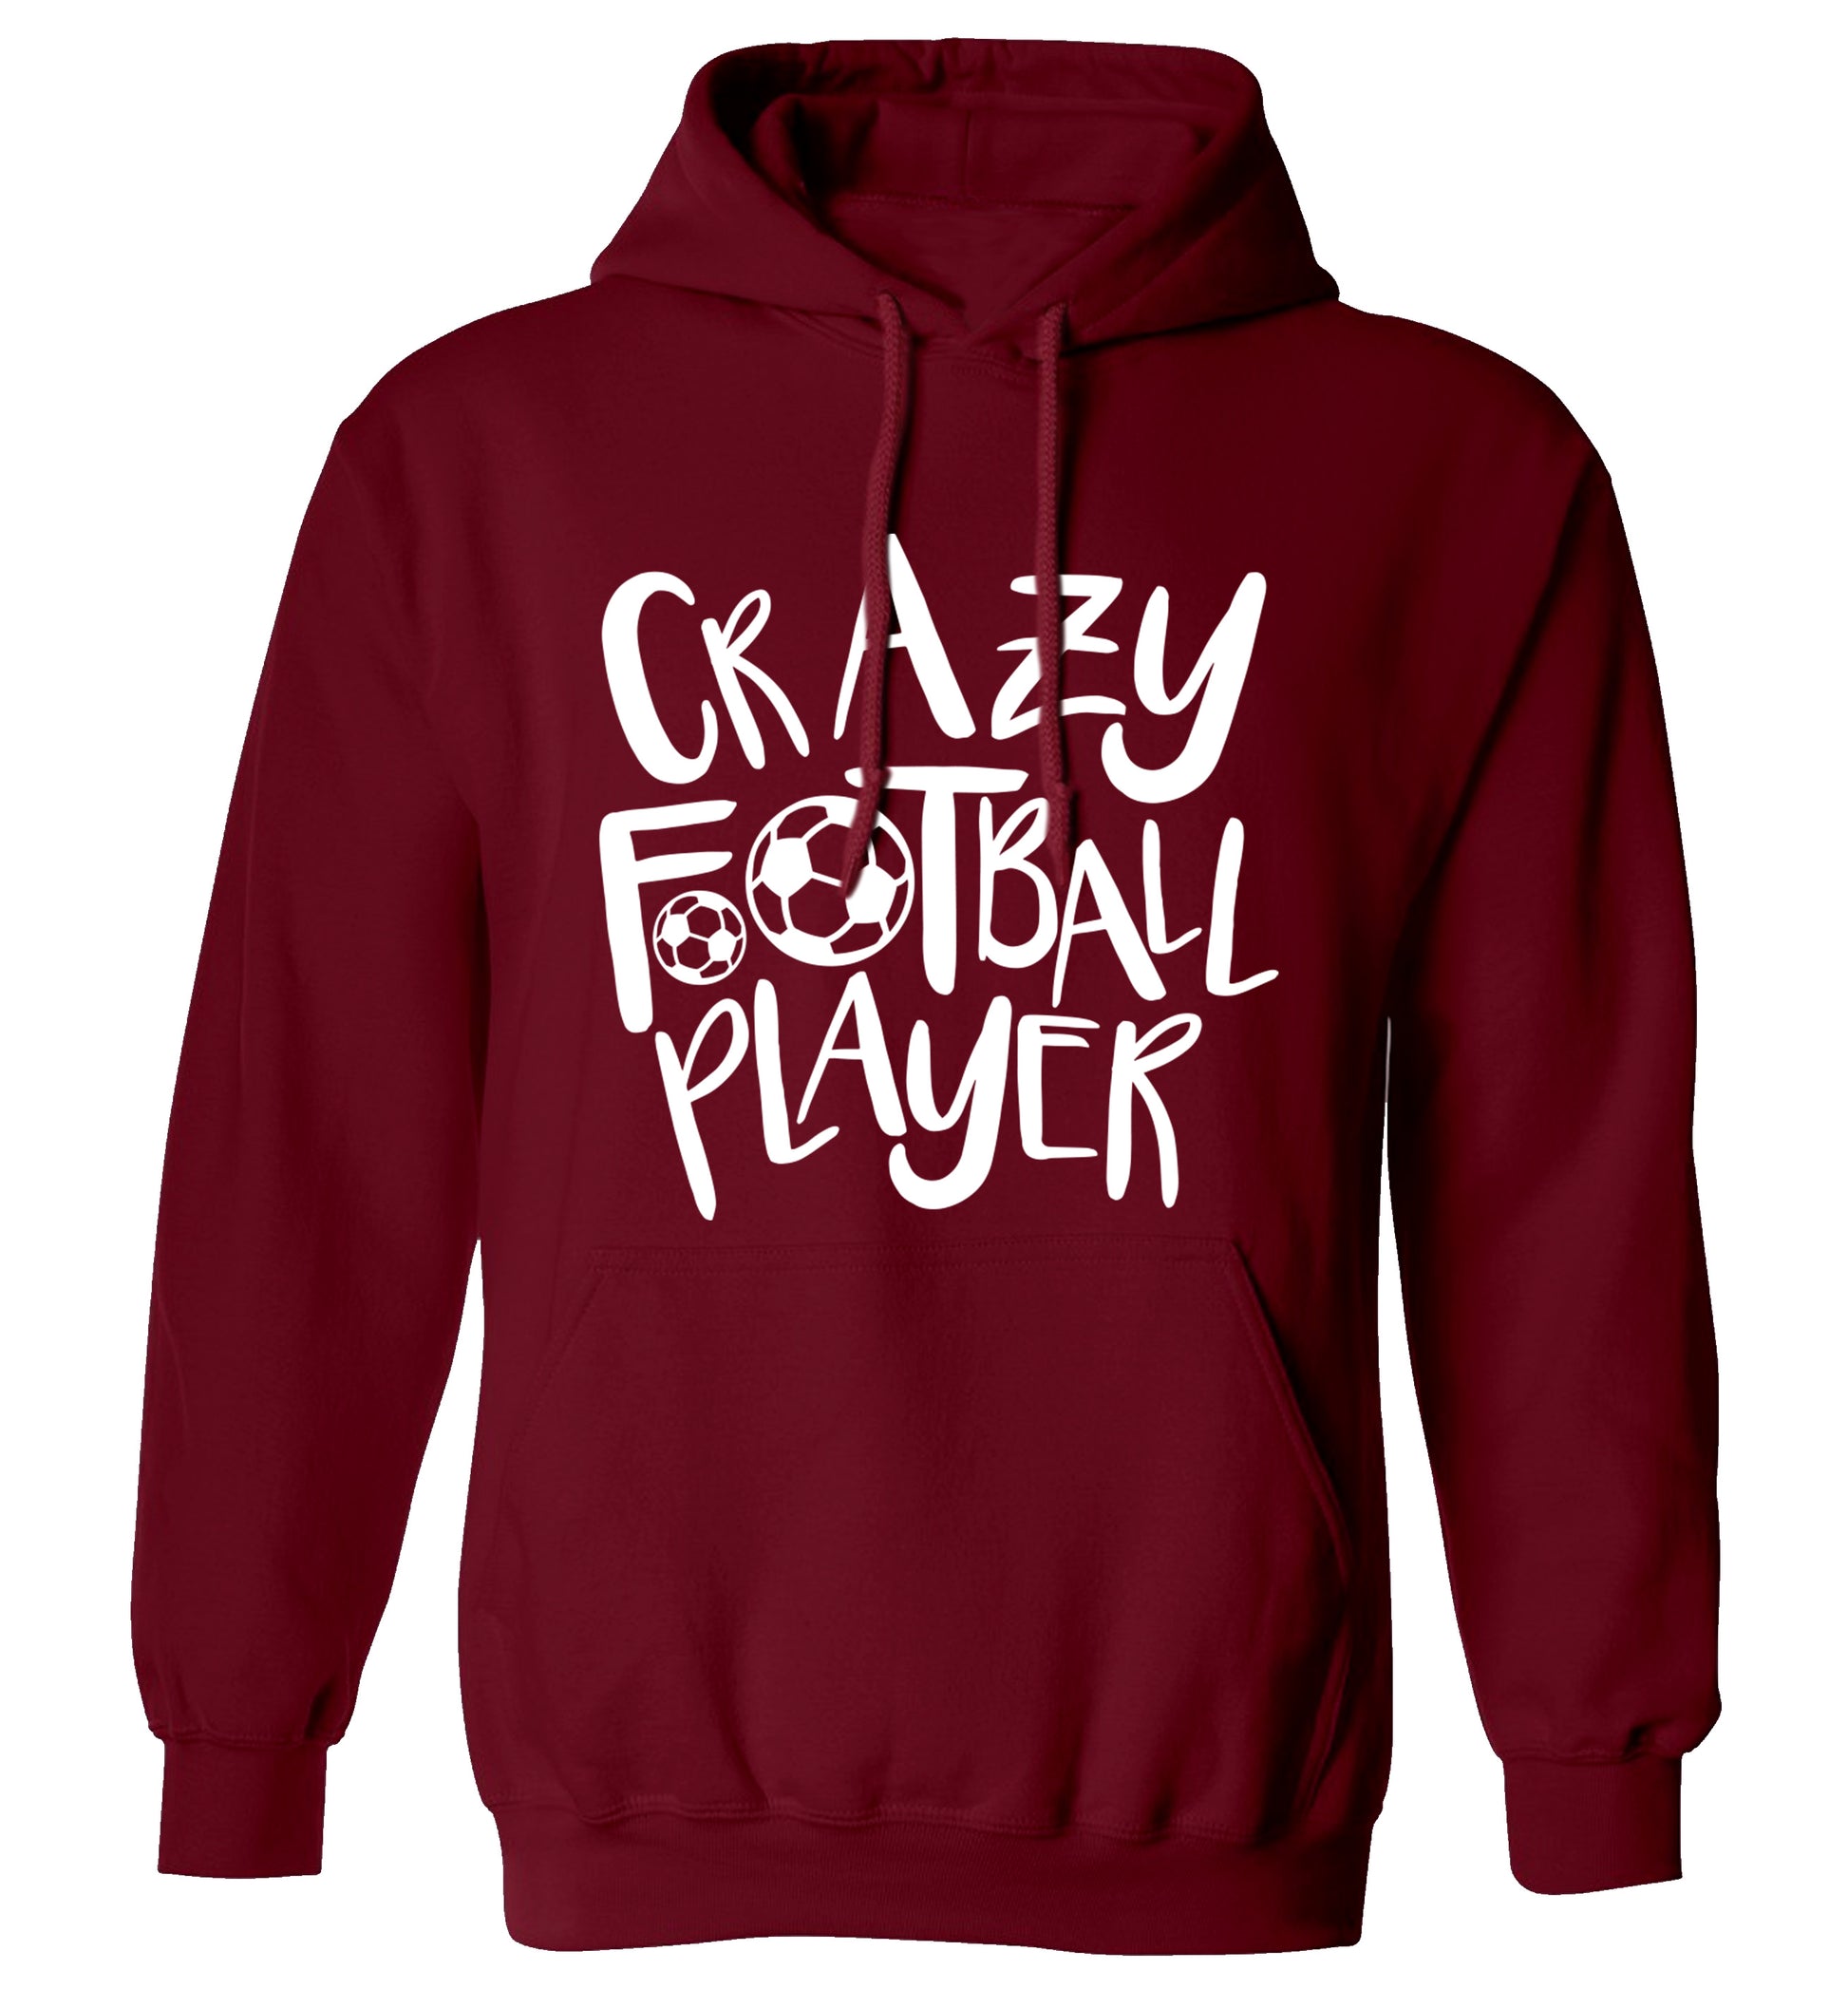 Crazy football player adults unisexmaroon hoodie 2XL